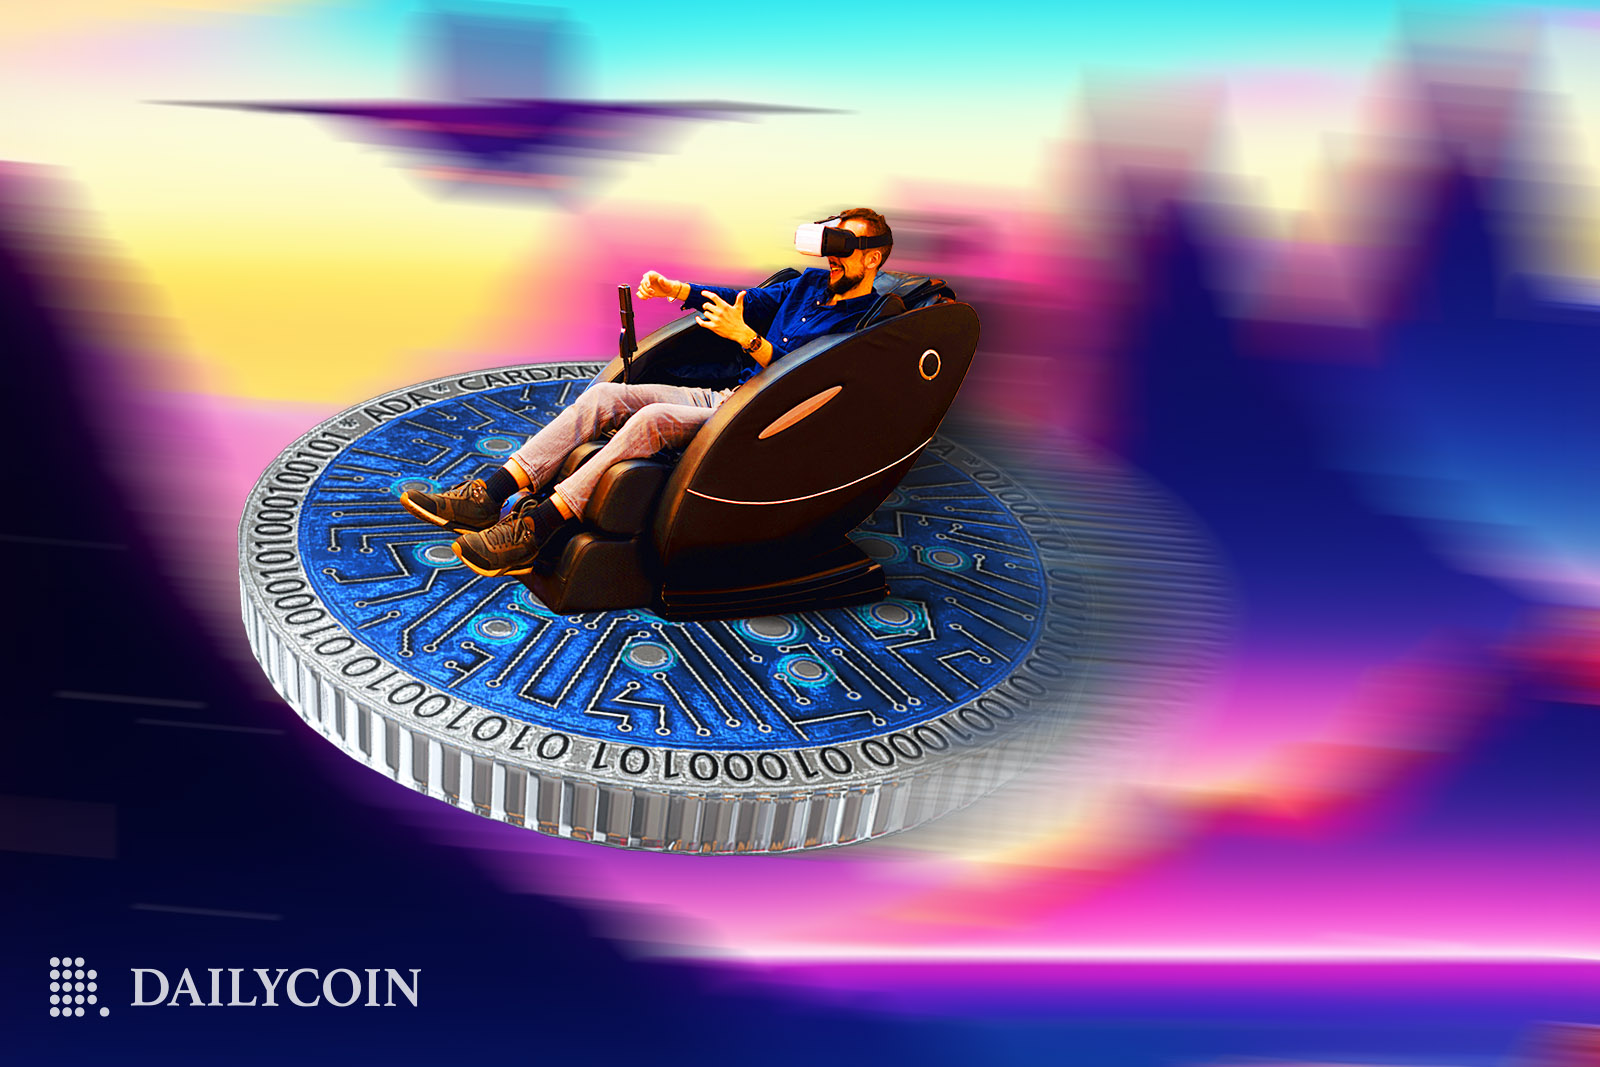 A man in a gaming chair flying on giant Cardano ADA token.